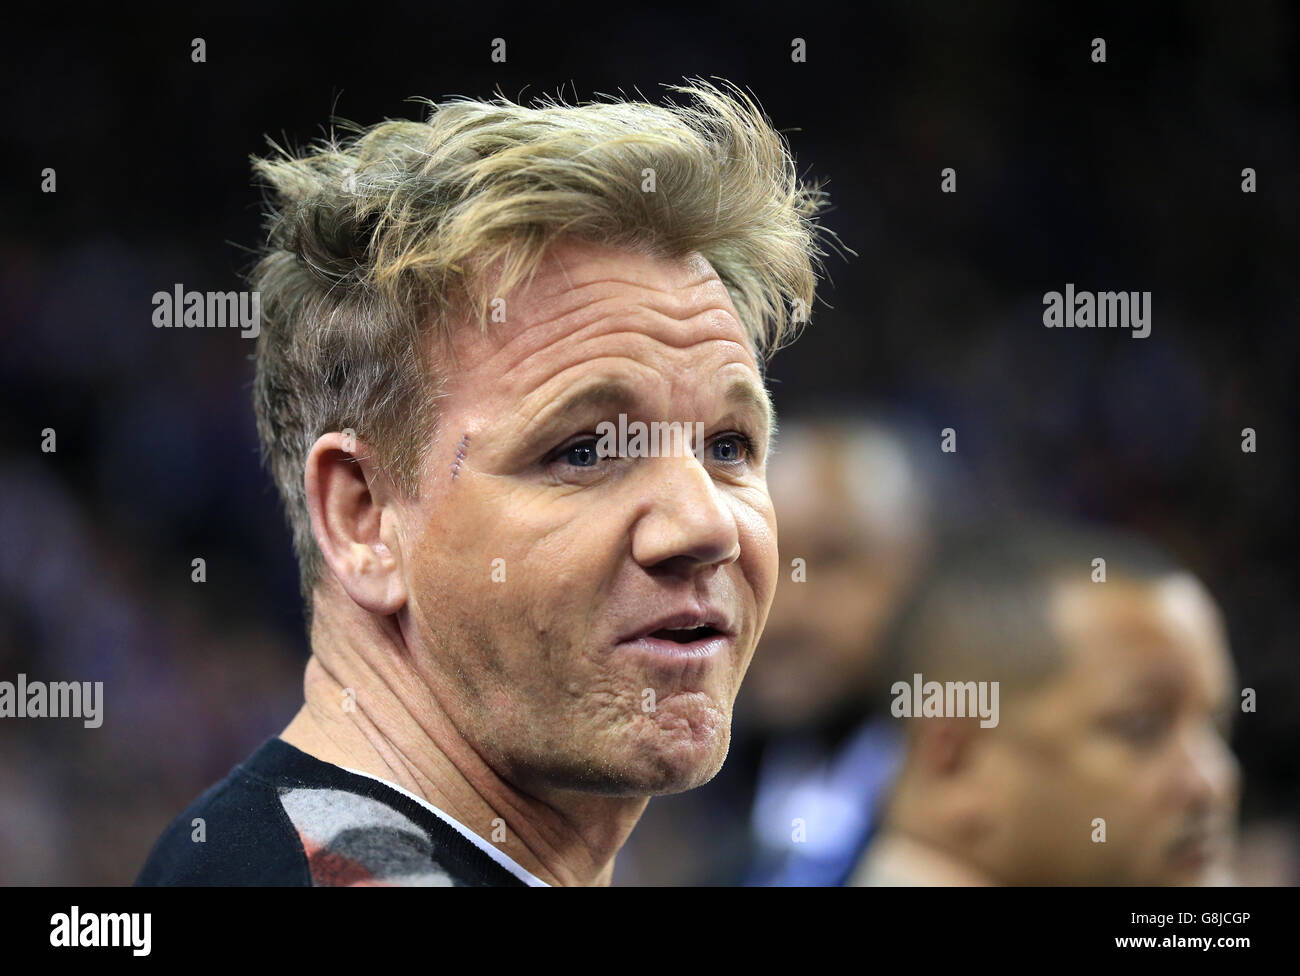 Celebrity Chef Gordon Ramsay in the stands during the NBA Global Games match at the O2 Arena, London. PRESS ASSOCIATION Photo. Picture date: Thursday January 14, 2016. See PA story BASKETBALL London. Photo credit should read: Adam Davy/PA Wire. Stock Photo